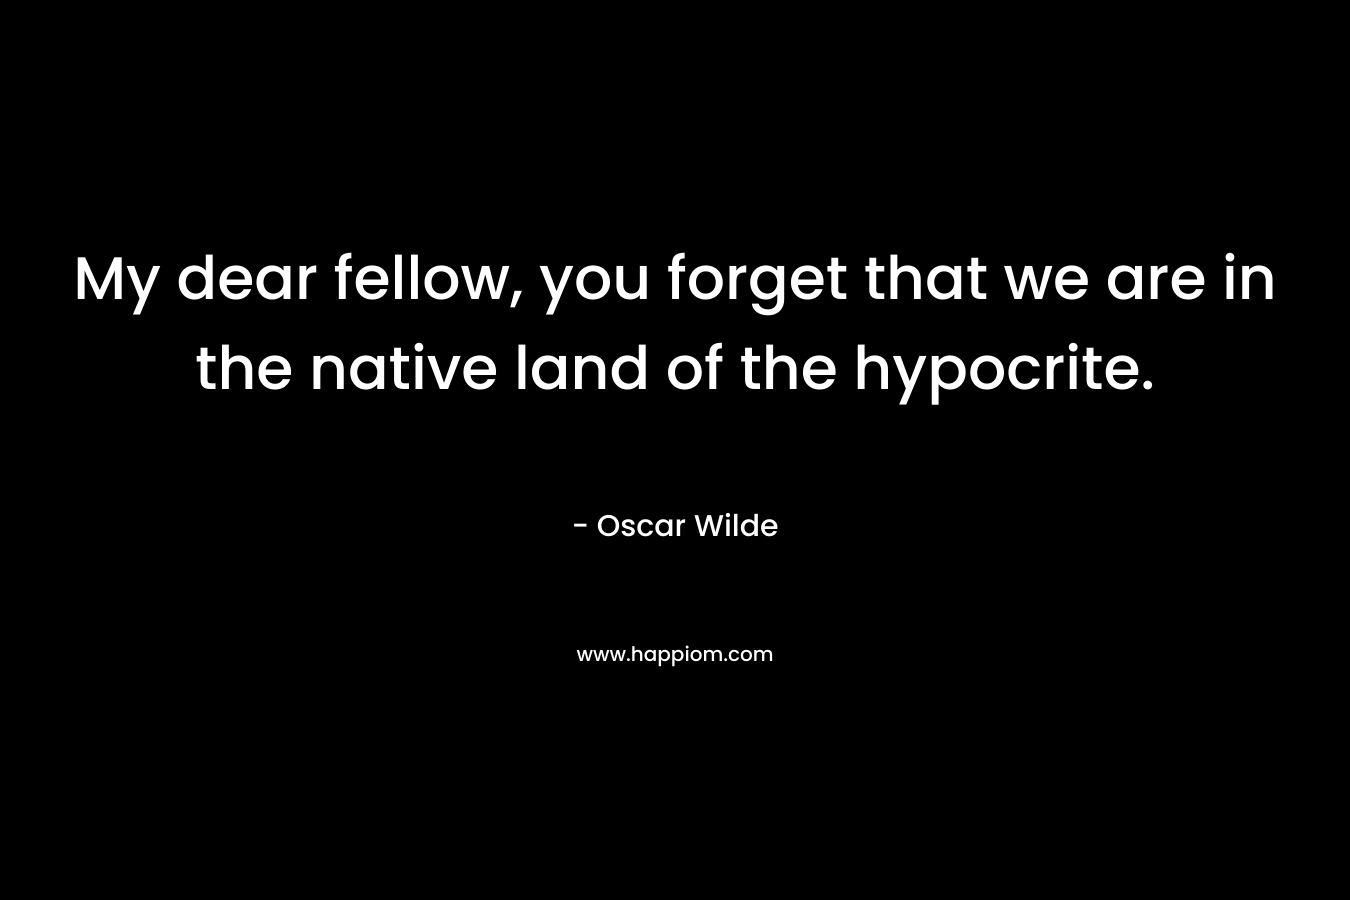 My dear fellow, you forget that we are in the native land of the hypocrite. – Oscar Wilde